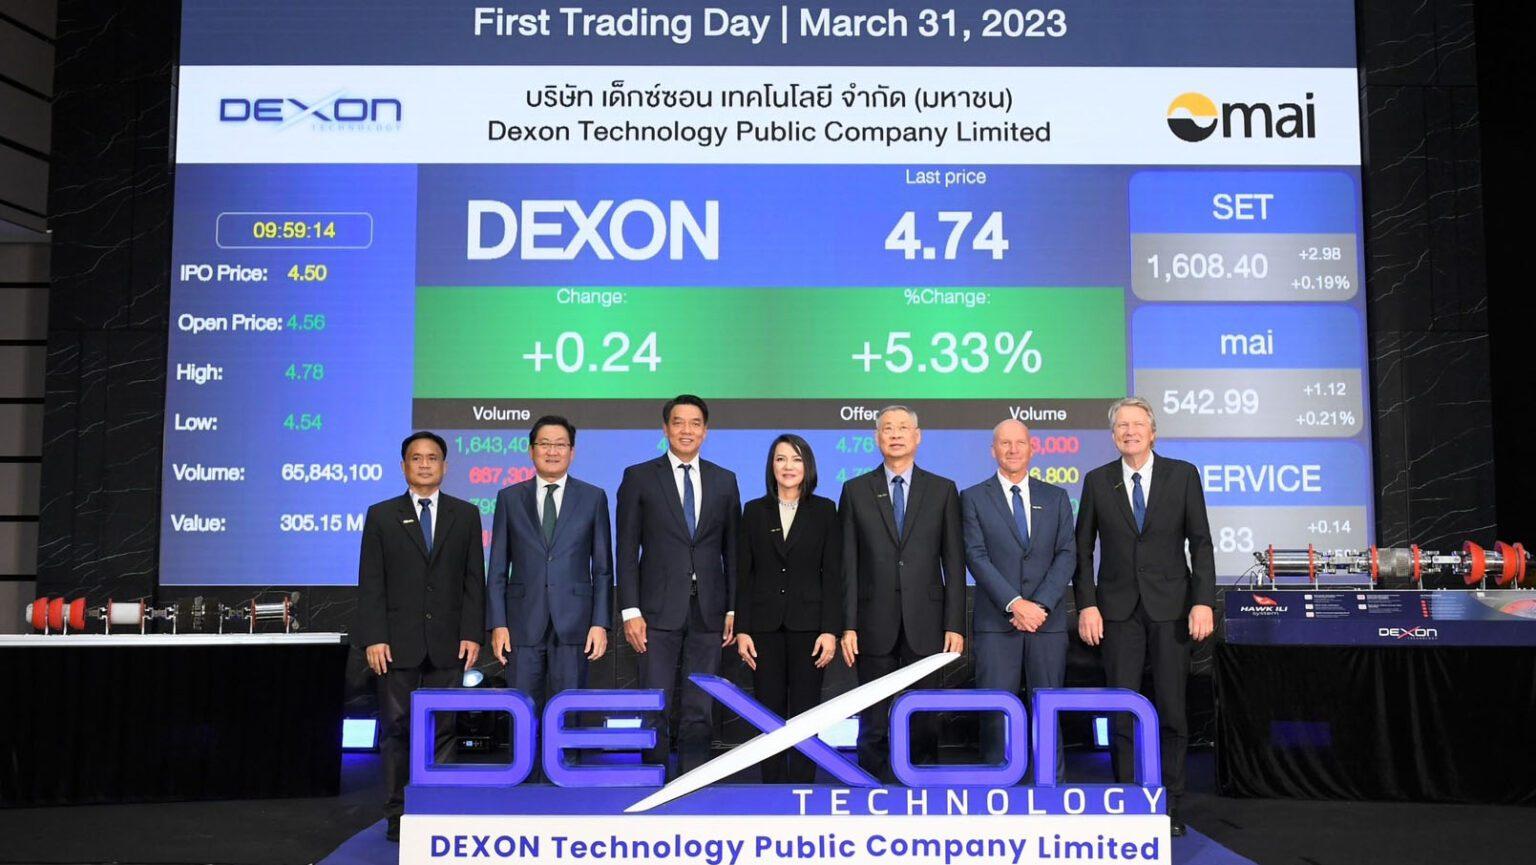 Dexon Technology becomes a publicly traded company on Thailand’s MAI